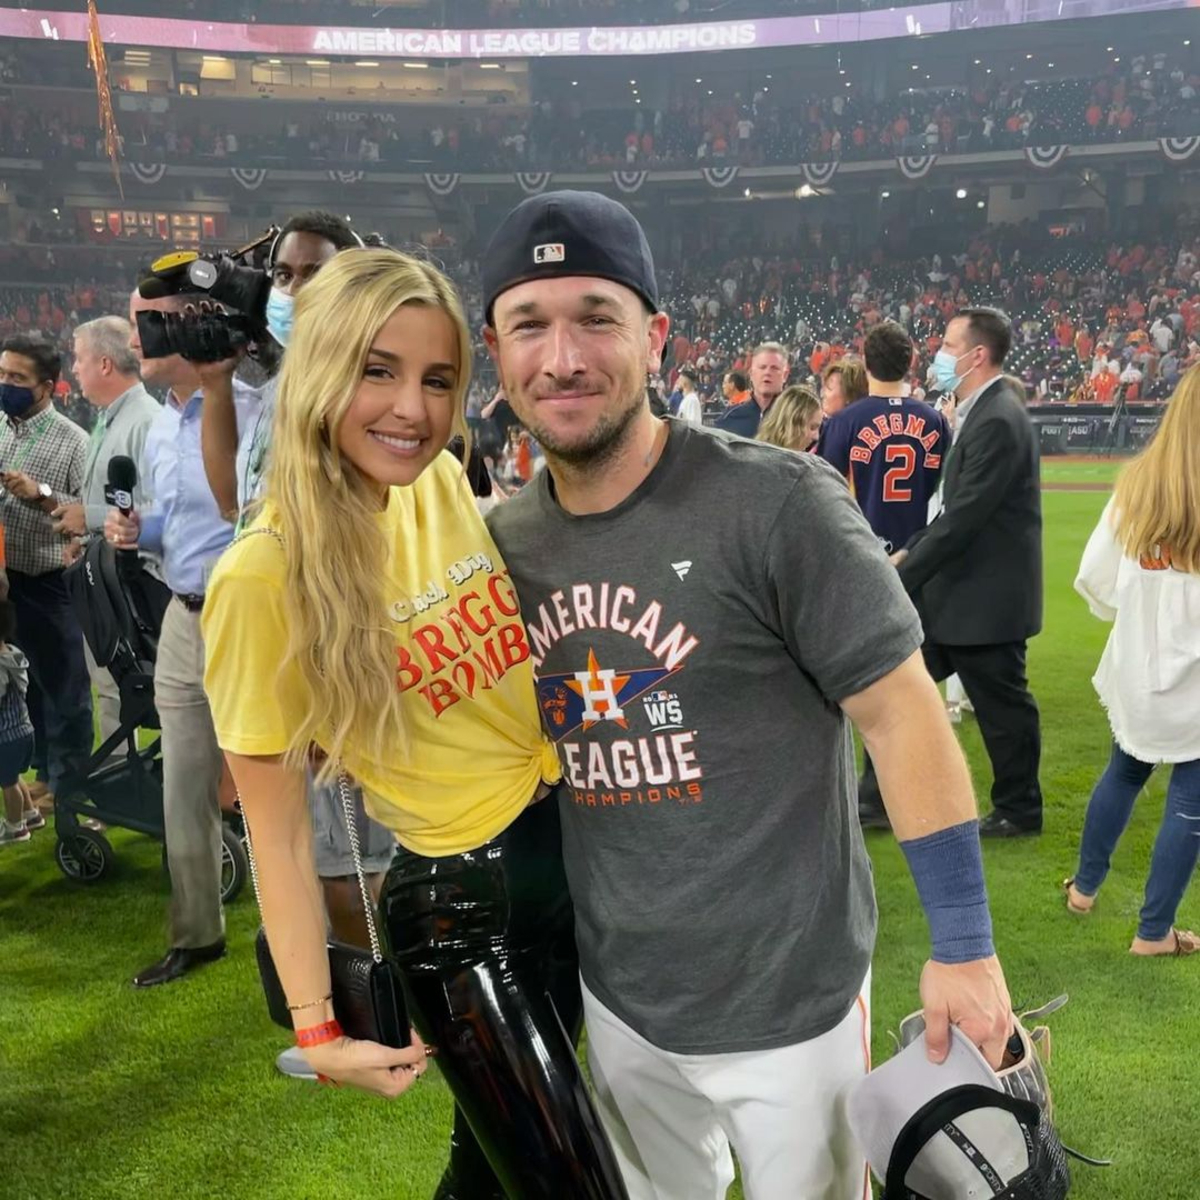 Meet the World Series WAGs cheering on the Astros and Phillies